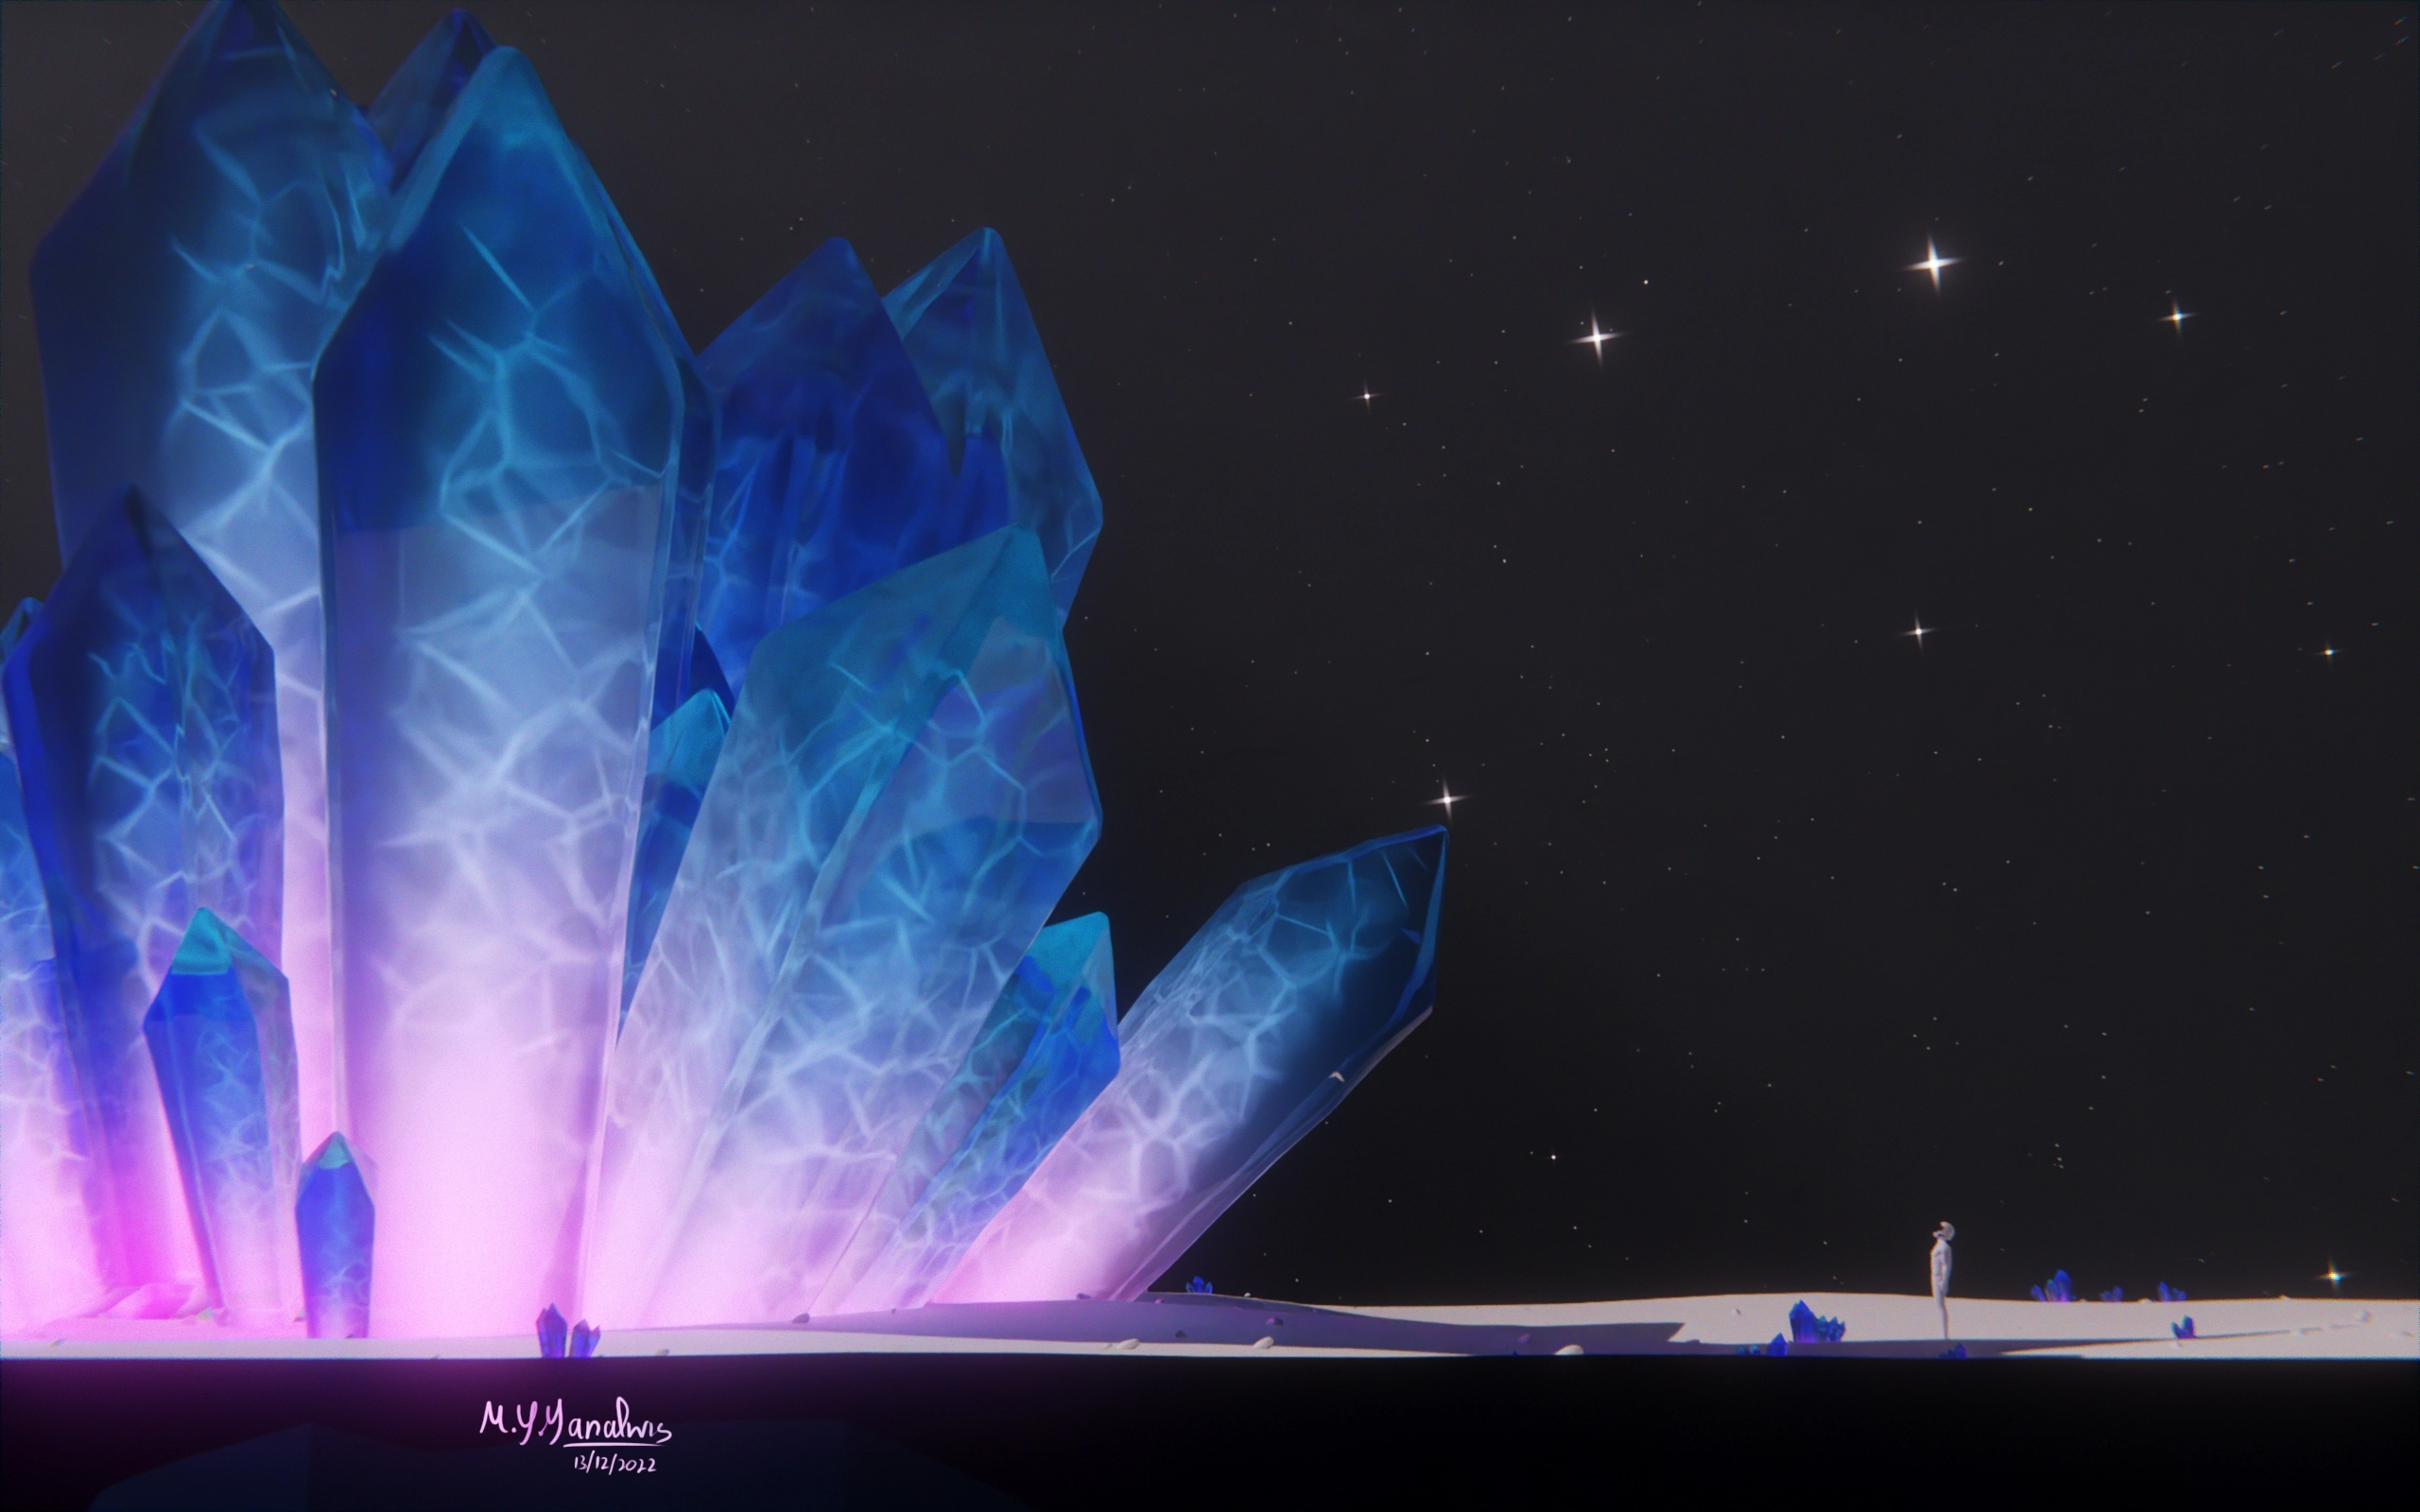 Crystal Scene 'inspired'(copied) from my friend's drawing